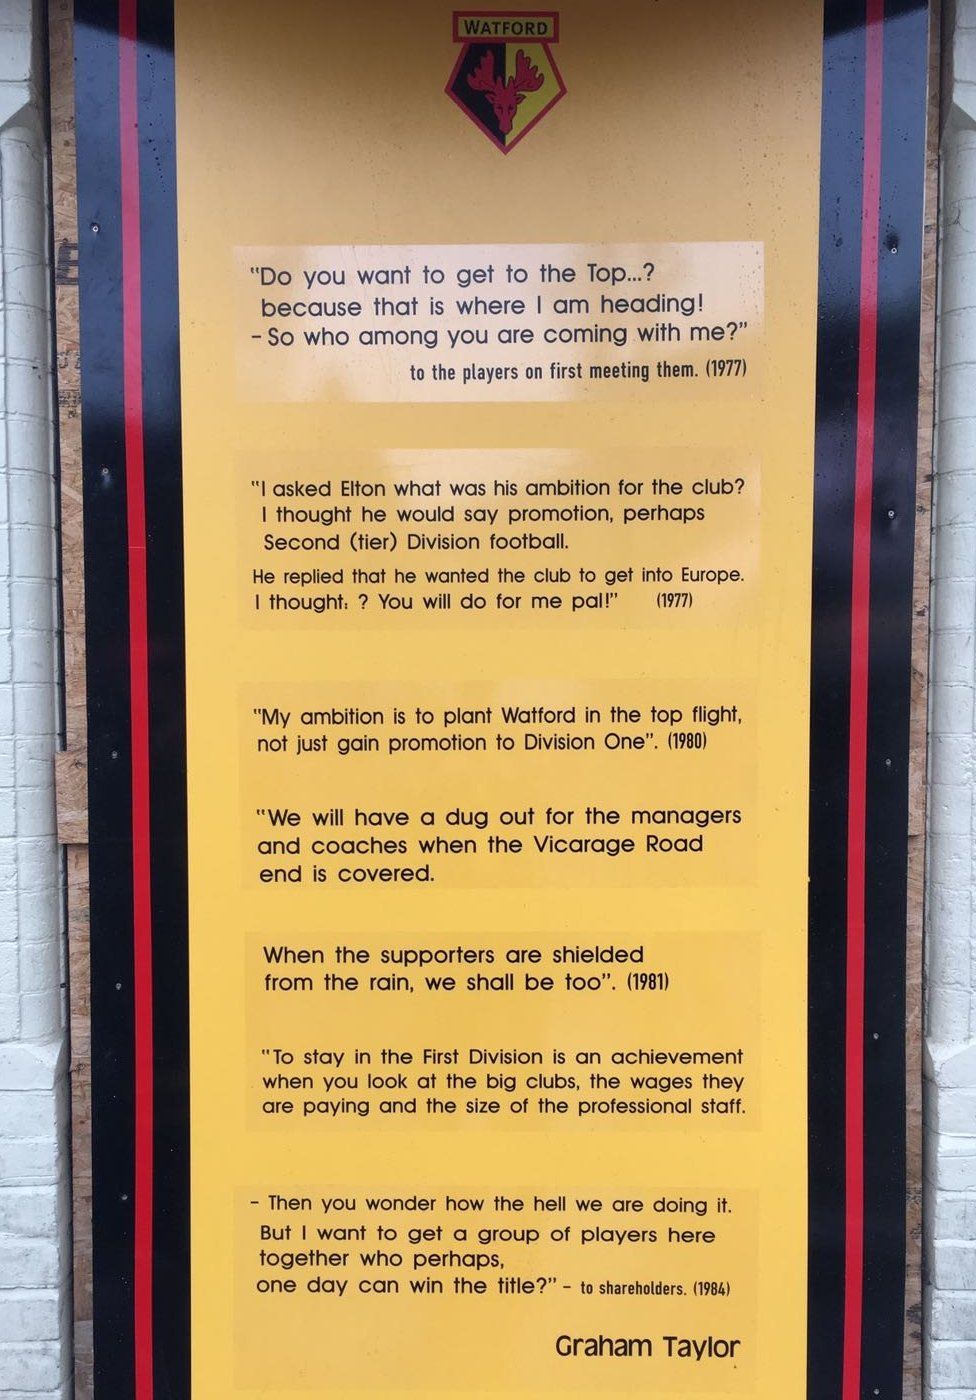 Quotes by Graham Taylor outside The One Bell pub